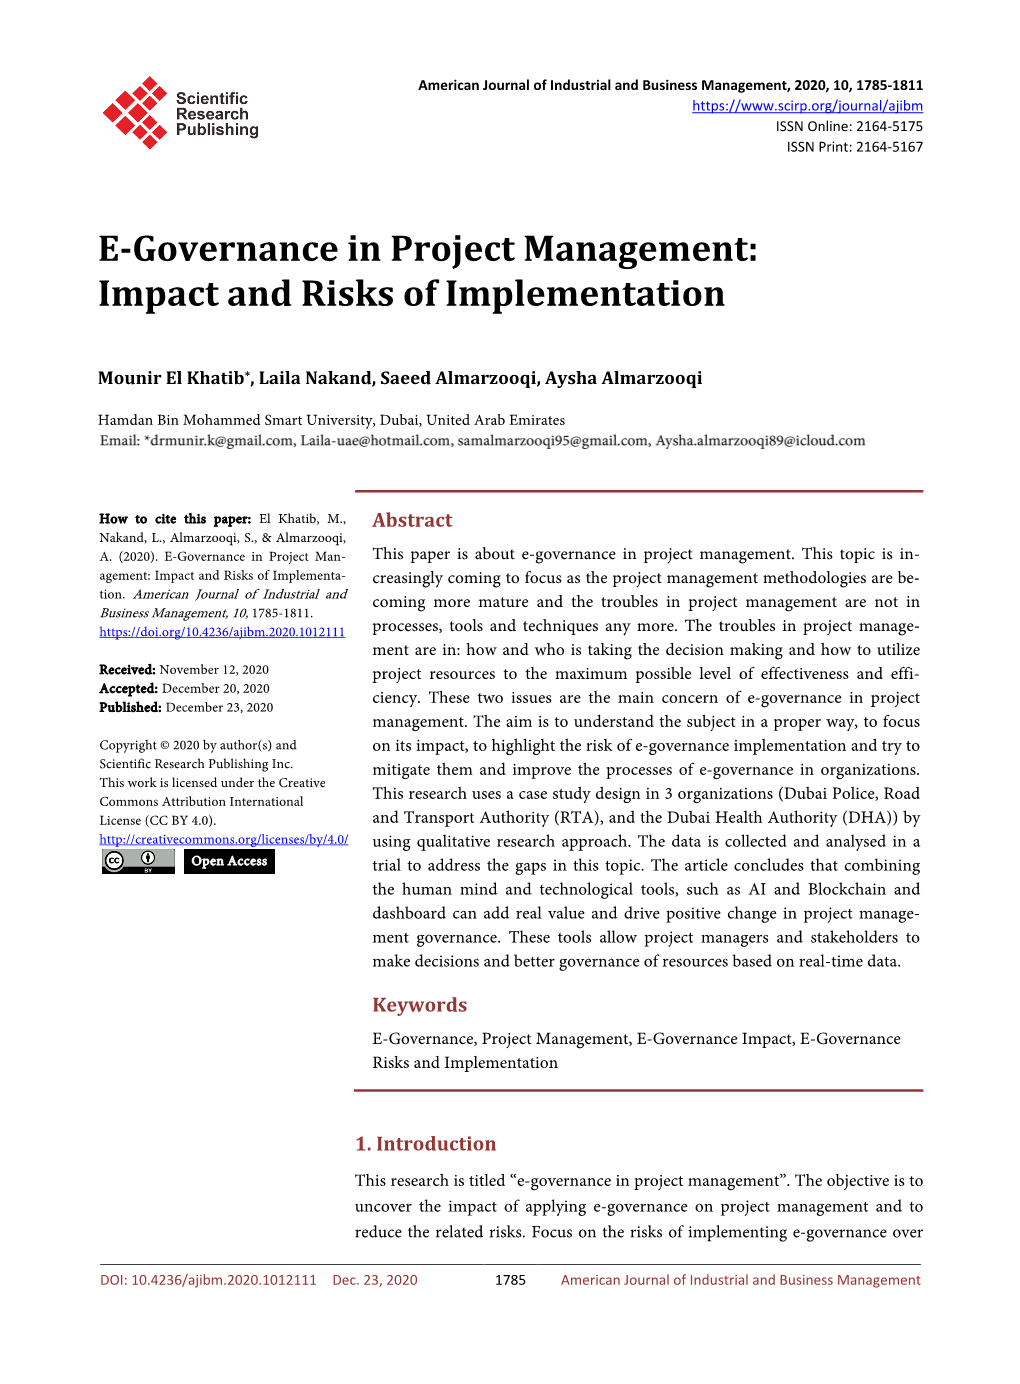 E-Governance in Project Management: Impact and Risks of Implementation